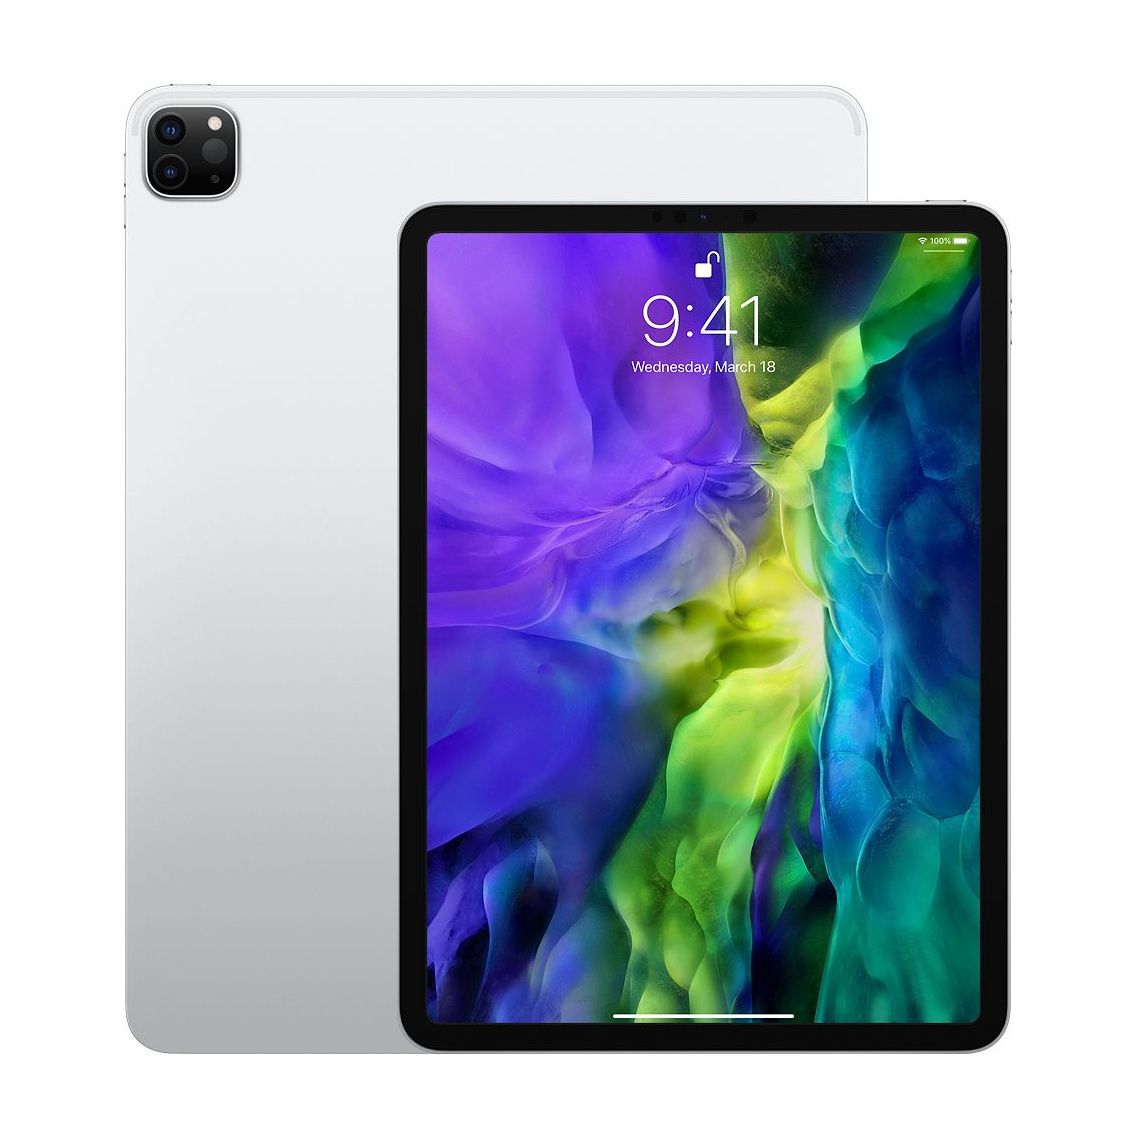 Looking for a great tablet? You can't do much better than the iPad Pro. The 256GB model is $100 off MSRP, and it'll make it in time for Christmas!